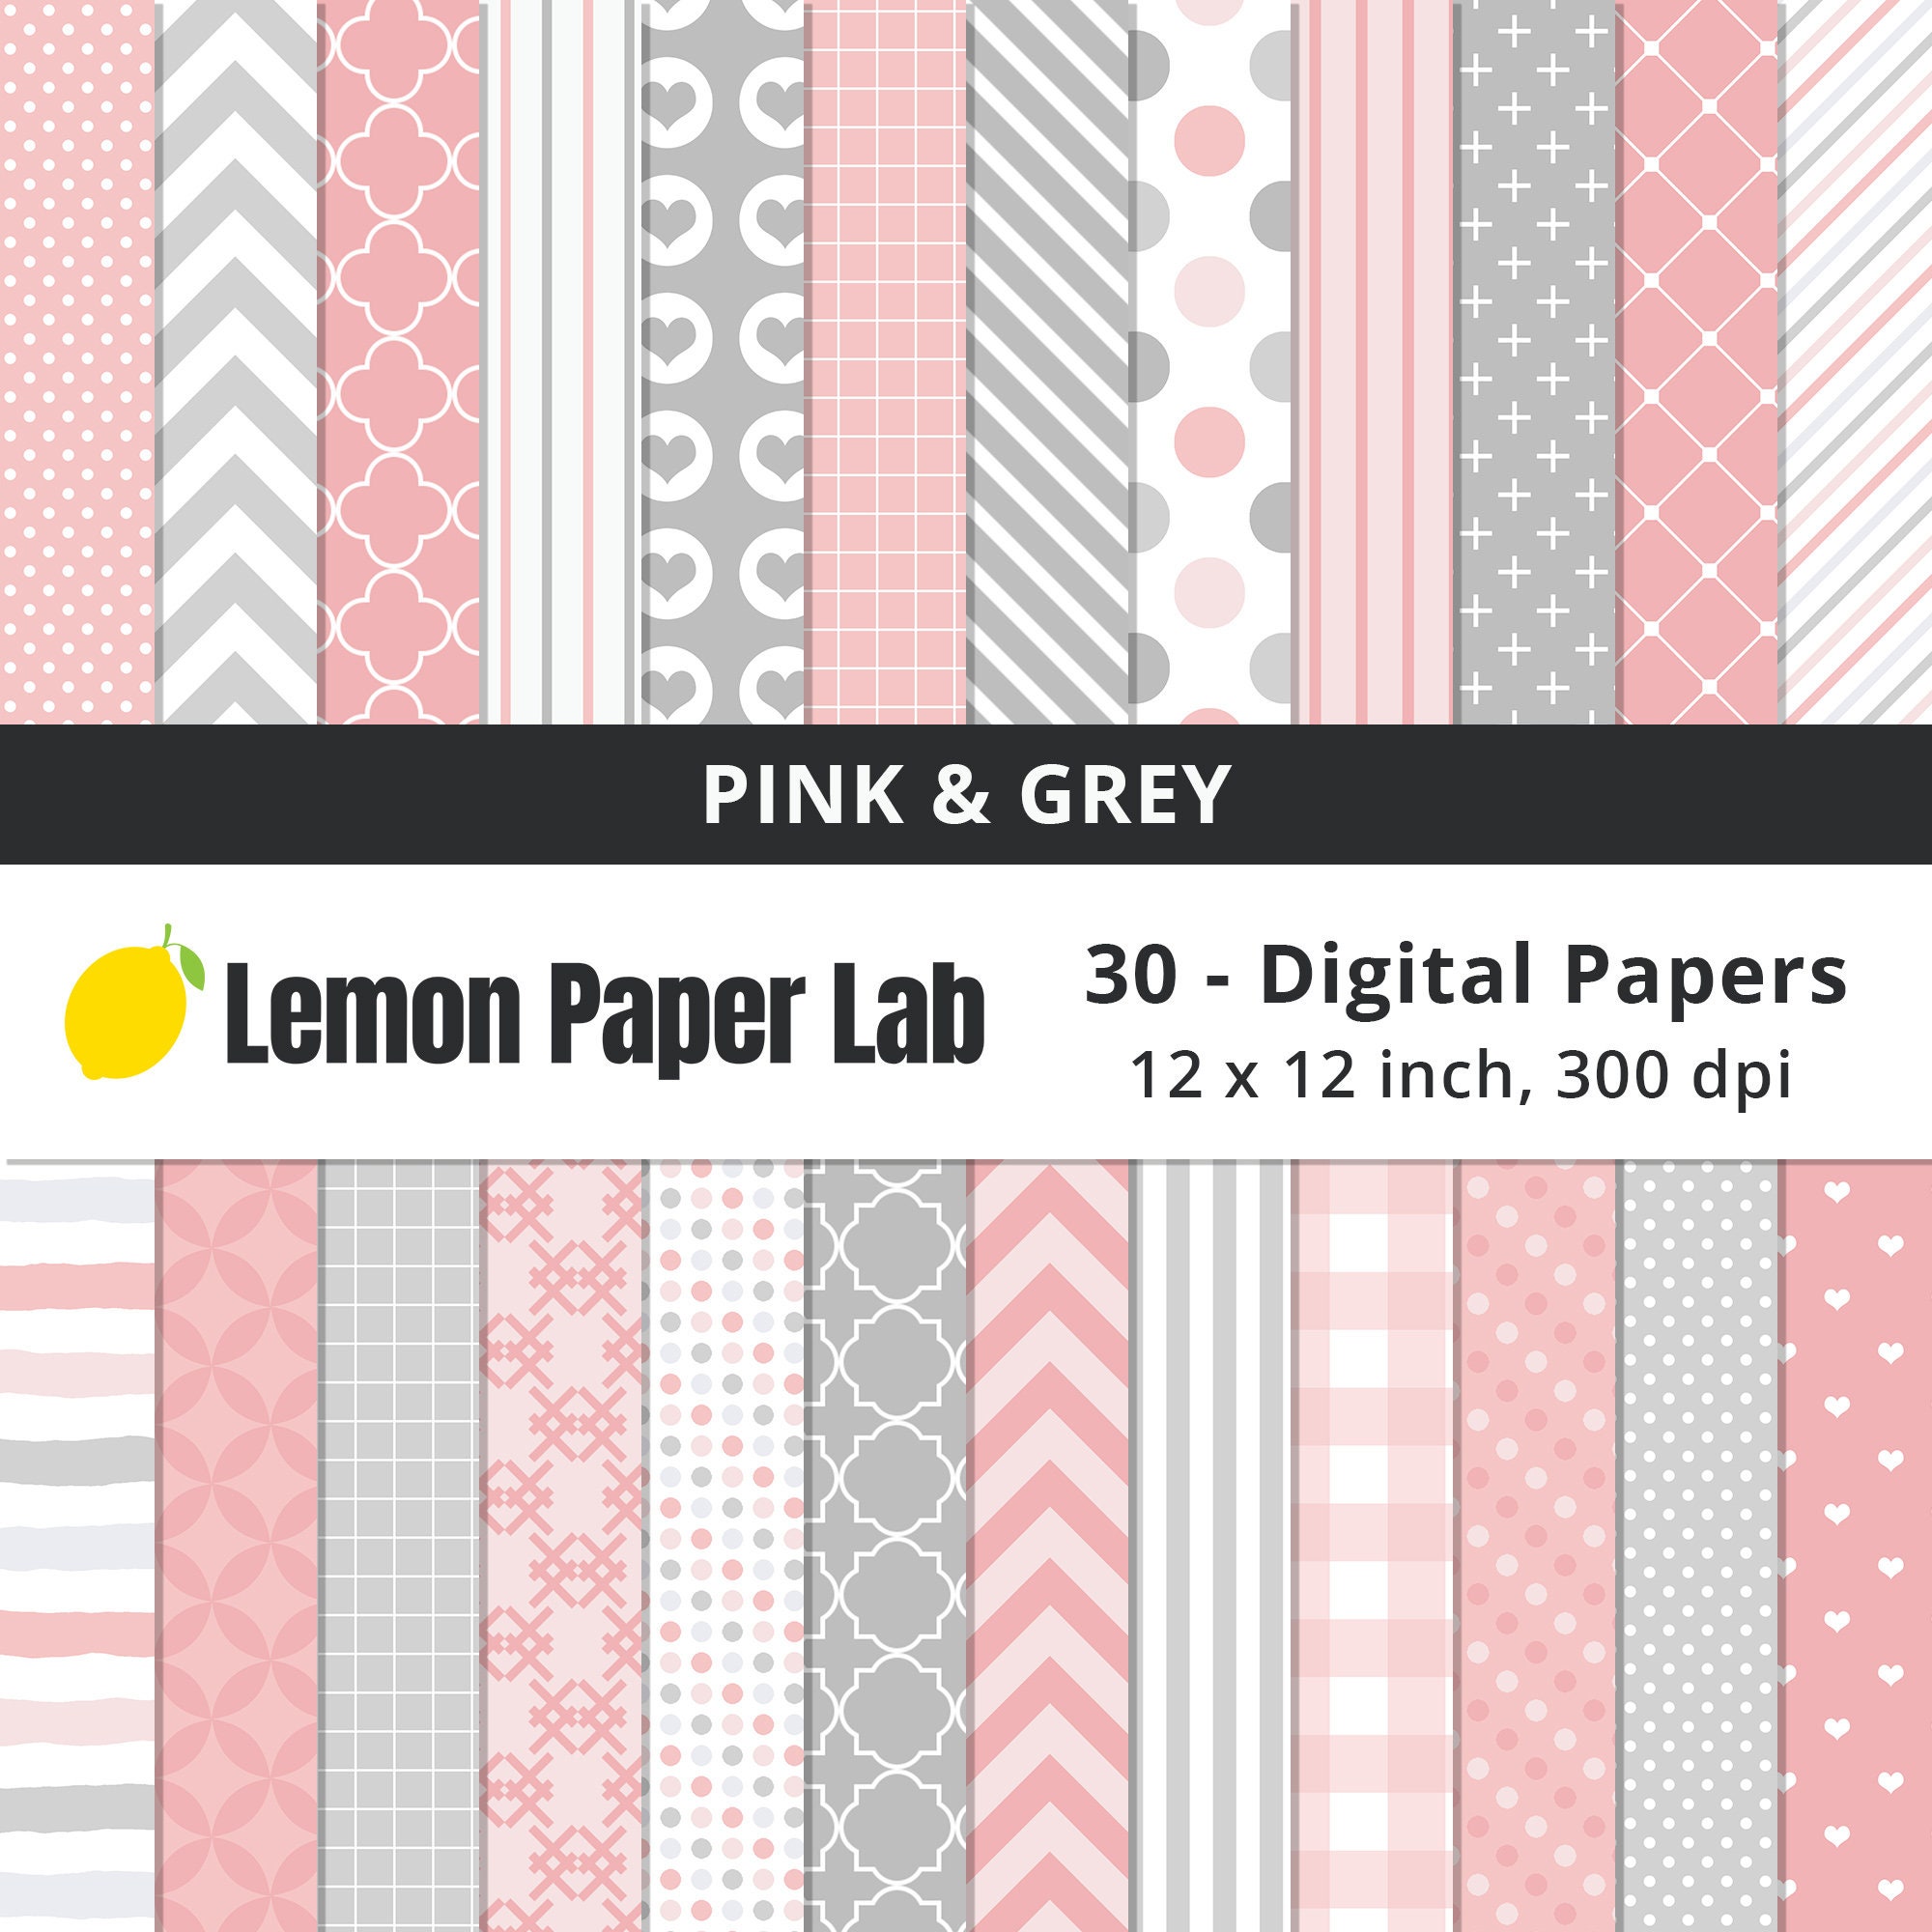 Purple and Pink Pattern Digital Paper Graphic by Lemon Paper Lab